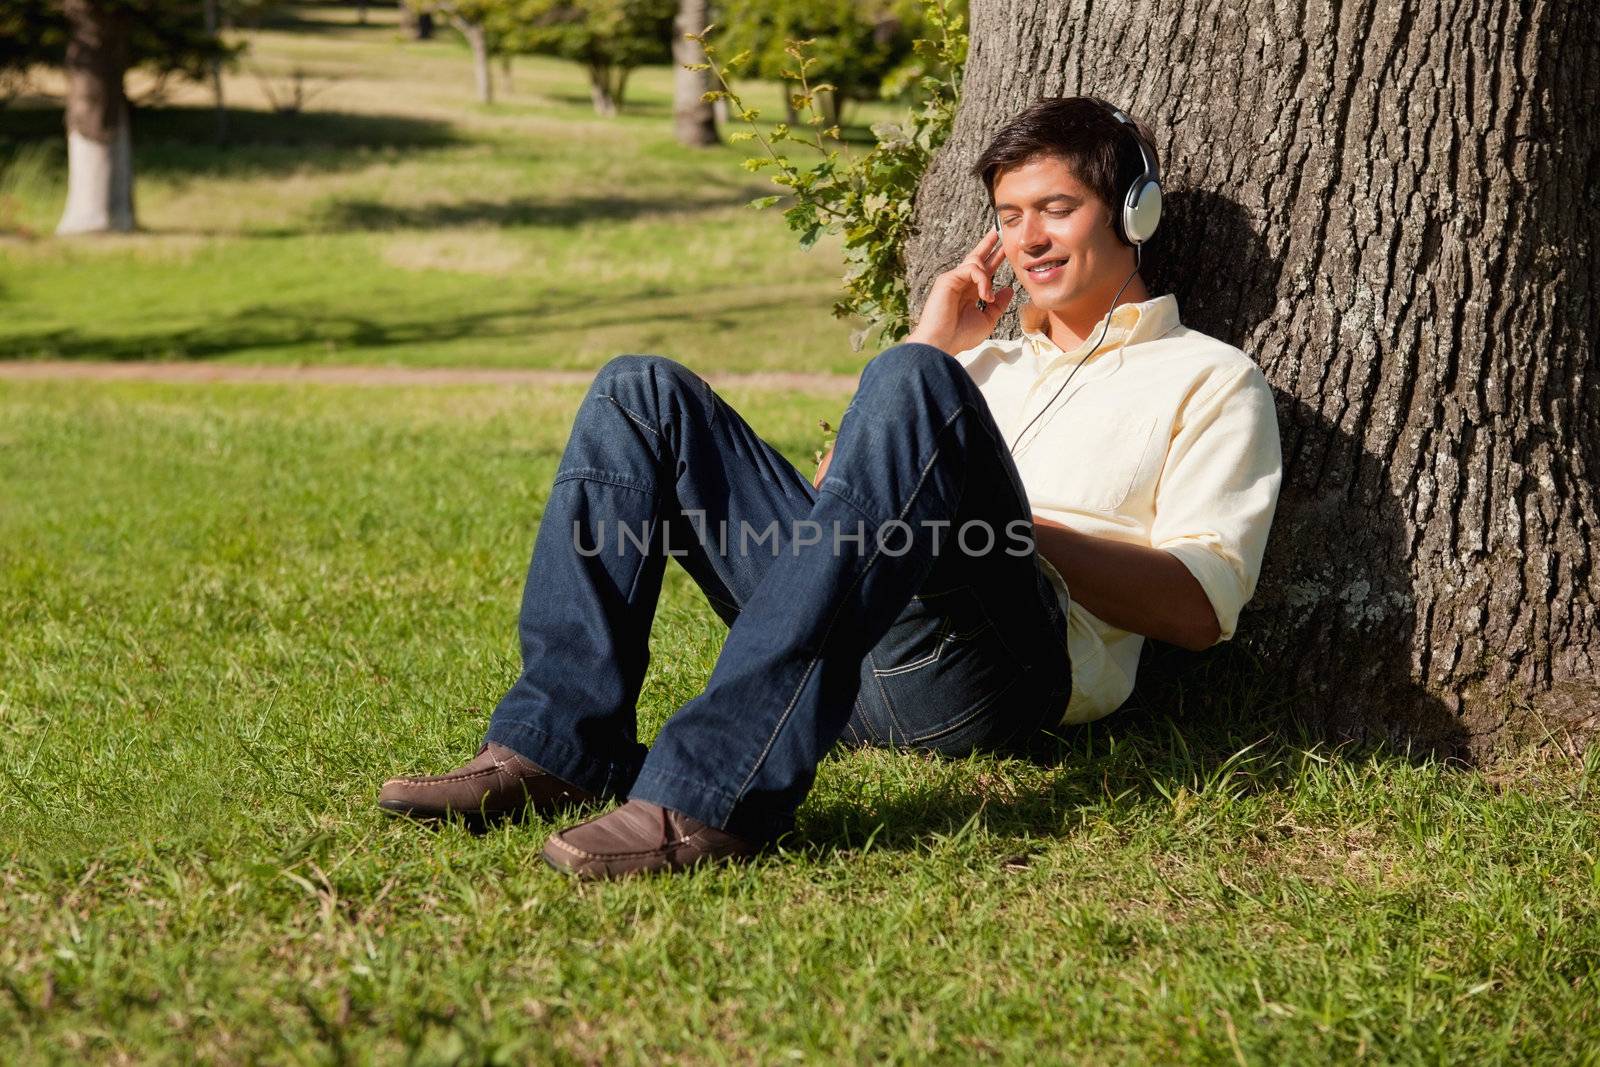 Man smiling as he uses headphones to listen to music while resting against the trunk of a tree